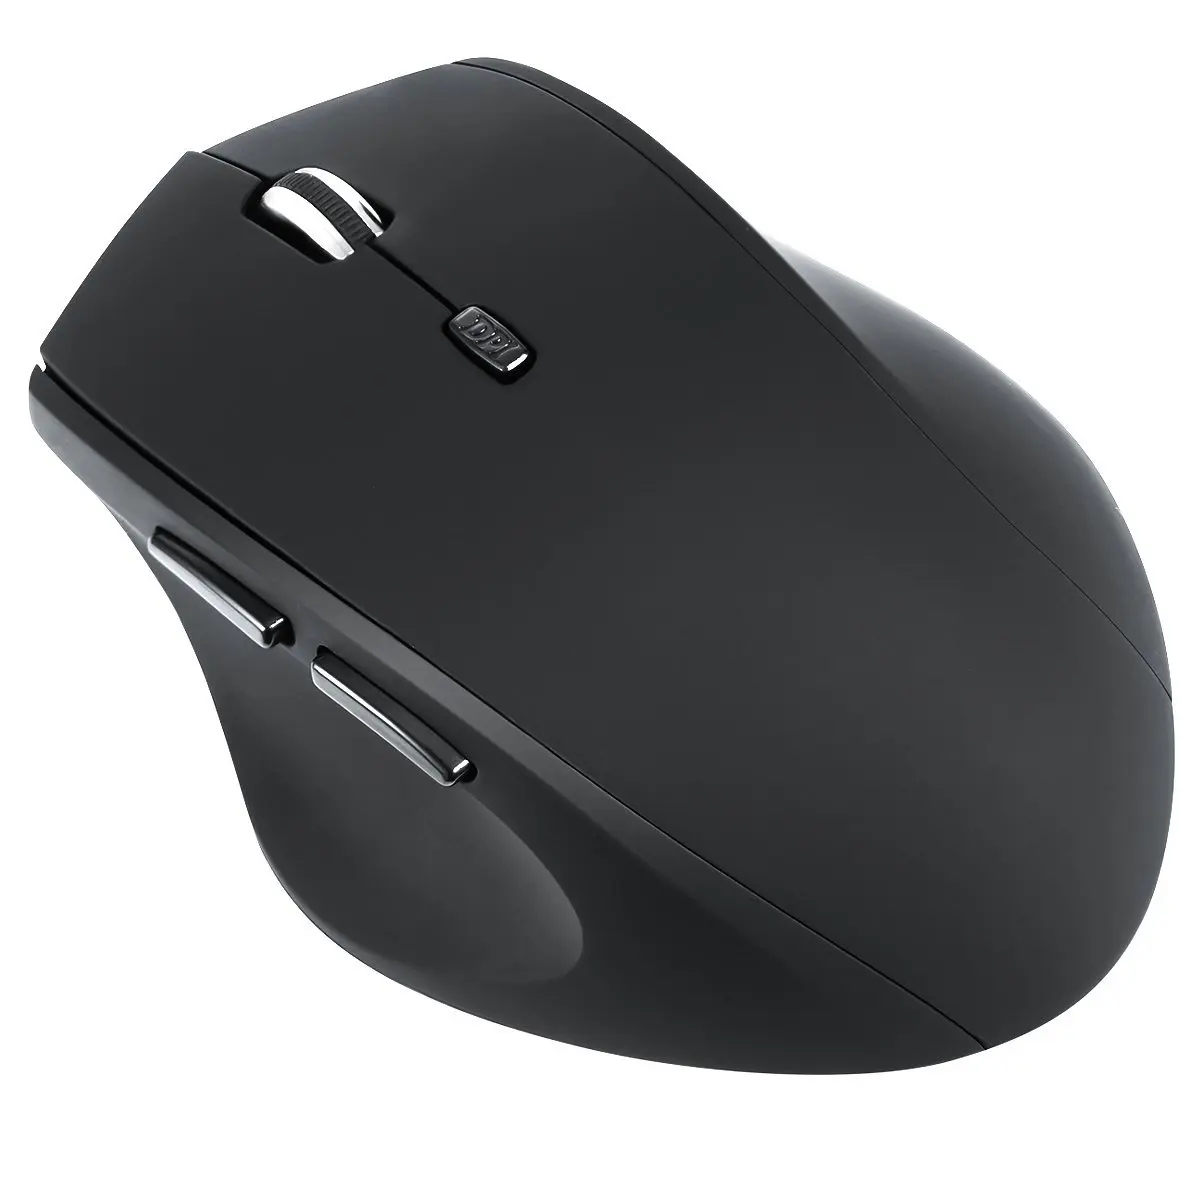 Wireless mouse 2. Pinterest Mouse move reference. Pinterest Mouse move Set reference.